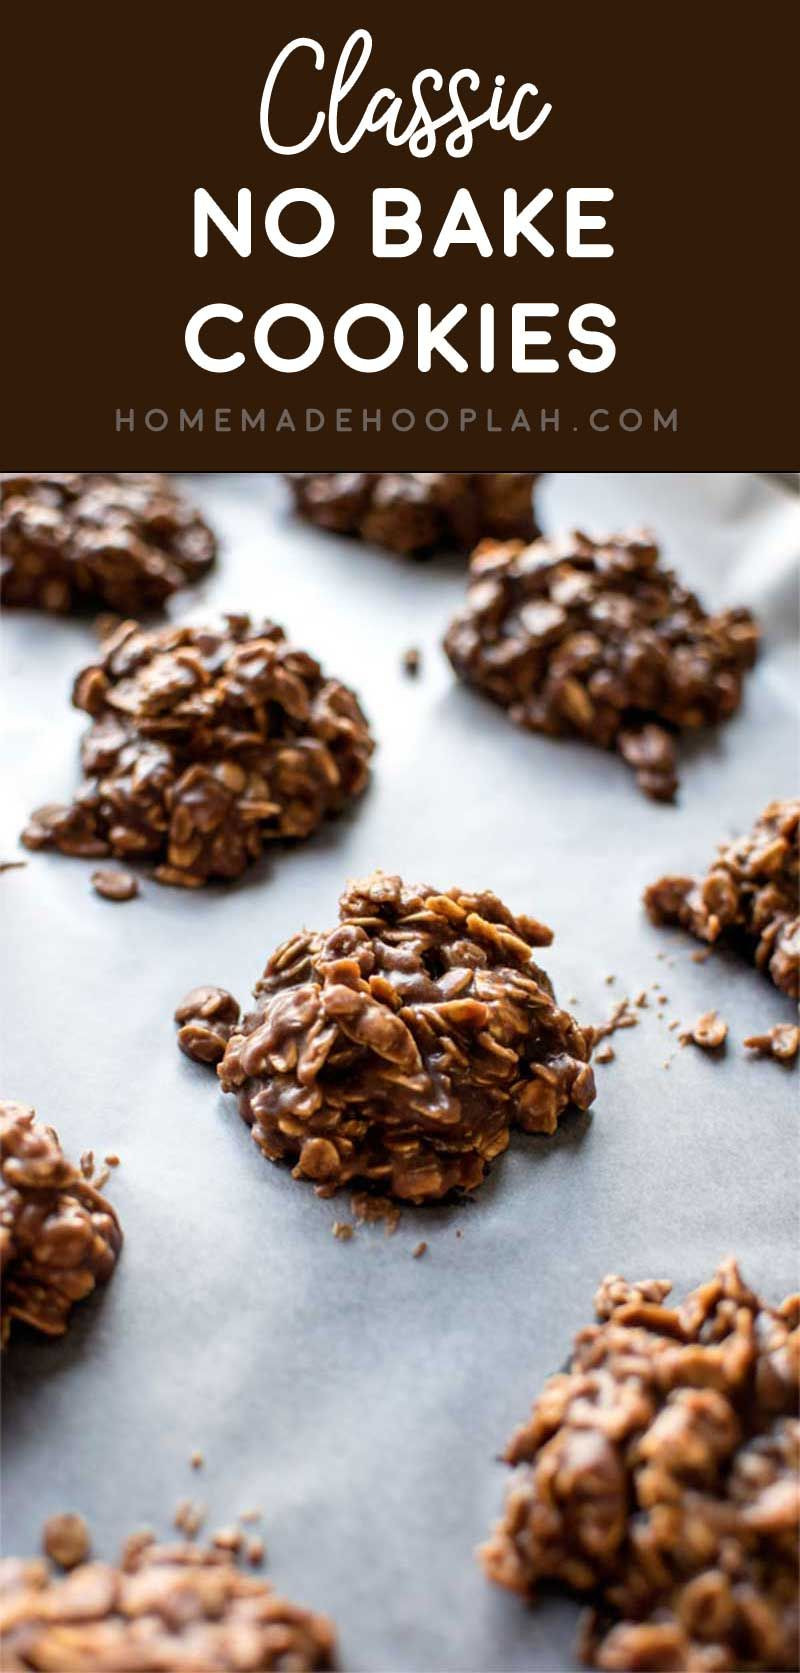 No Bake Cookies With Quick Oats
 Classic No Bake Cookies This recipe is a tried and true